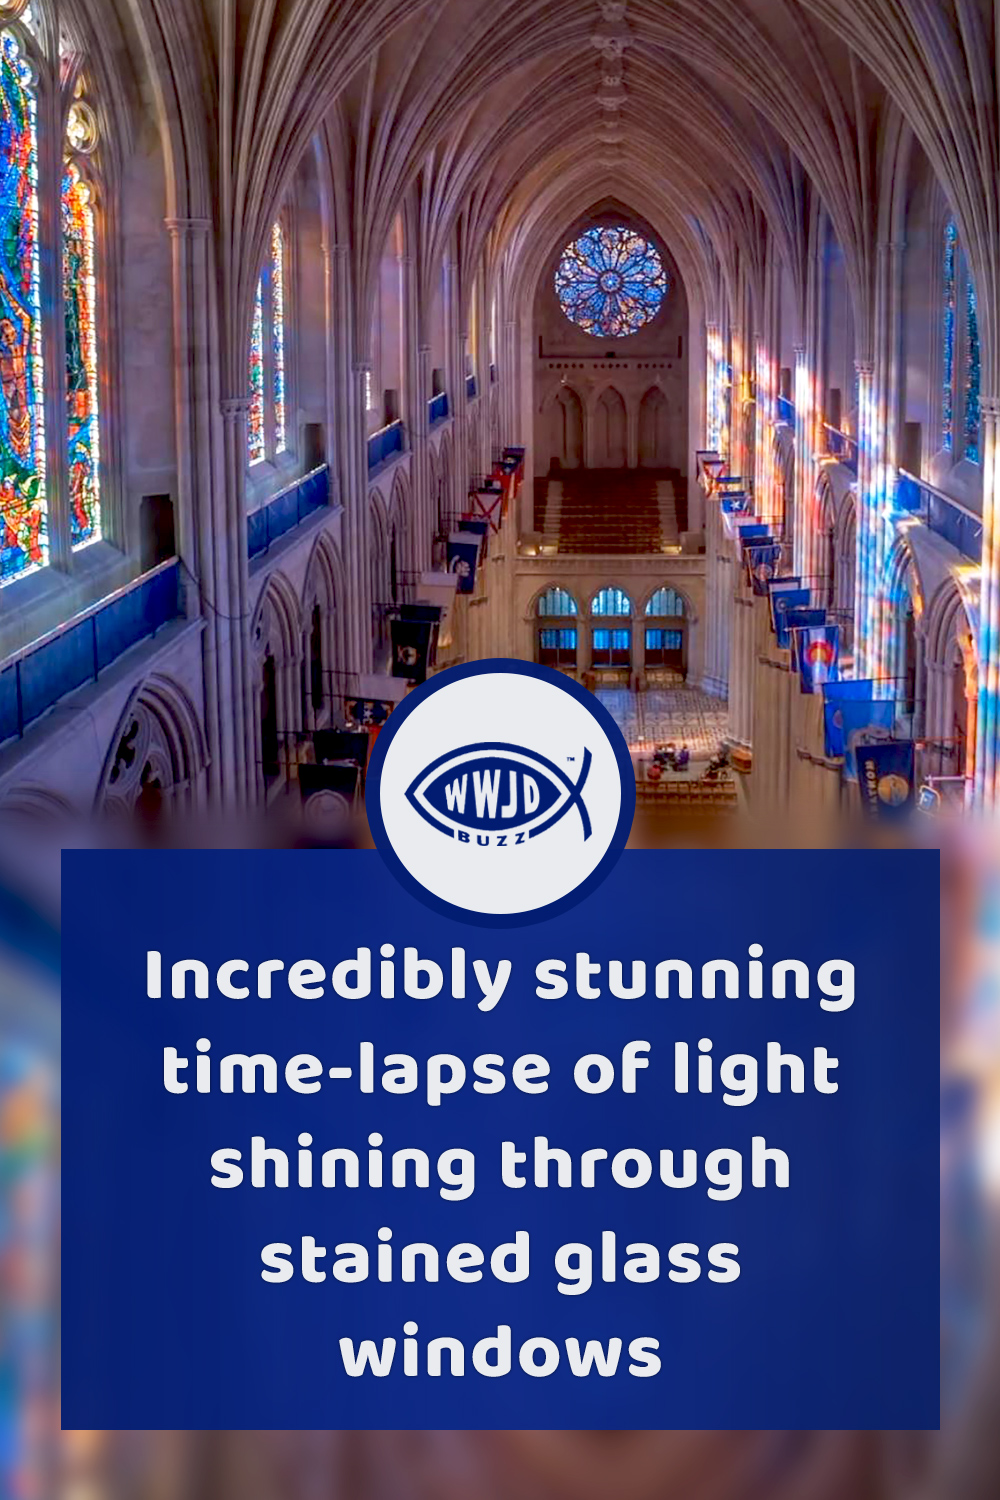 Incredibly stunning time-lapse of light shining through stained glass windows